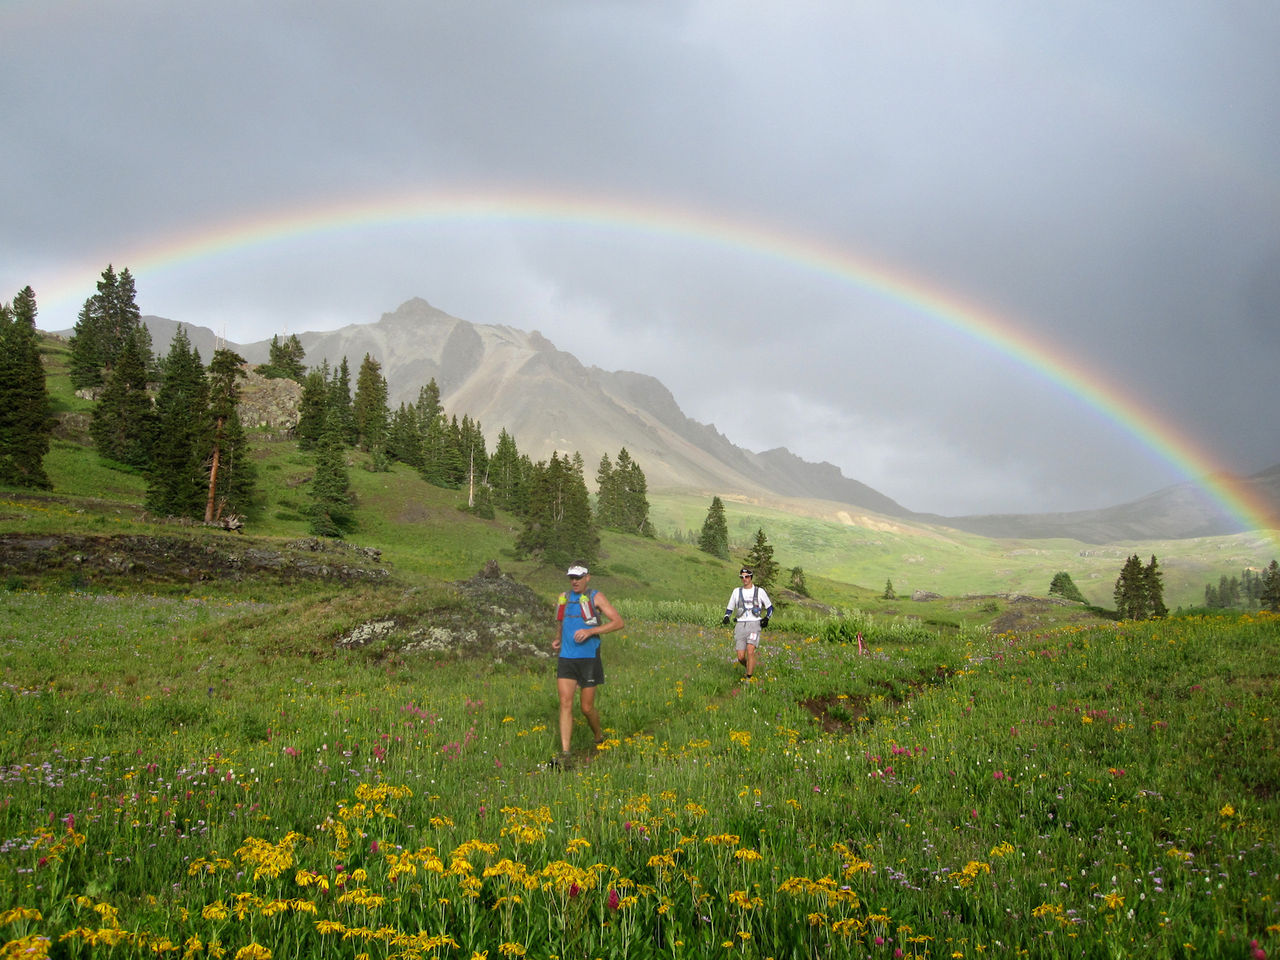  Runners taking part in the Hardrock 100